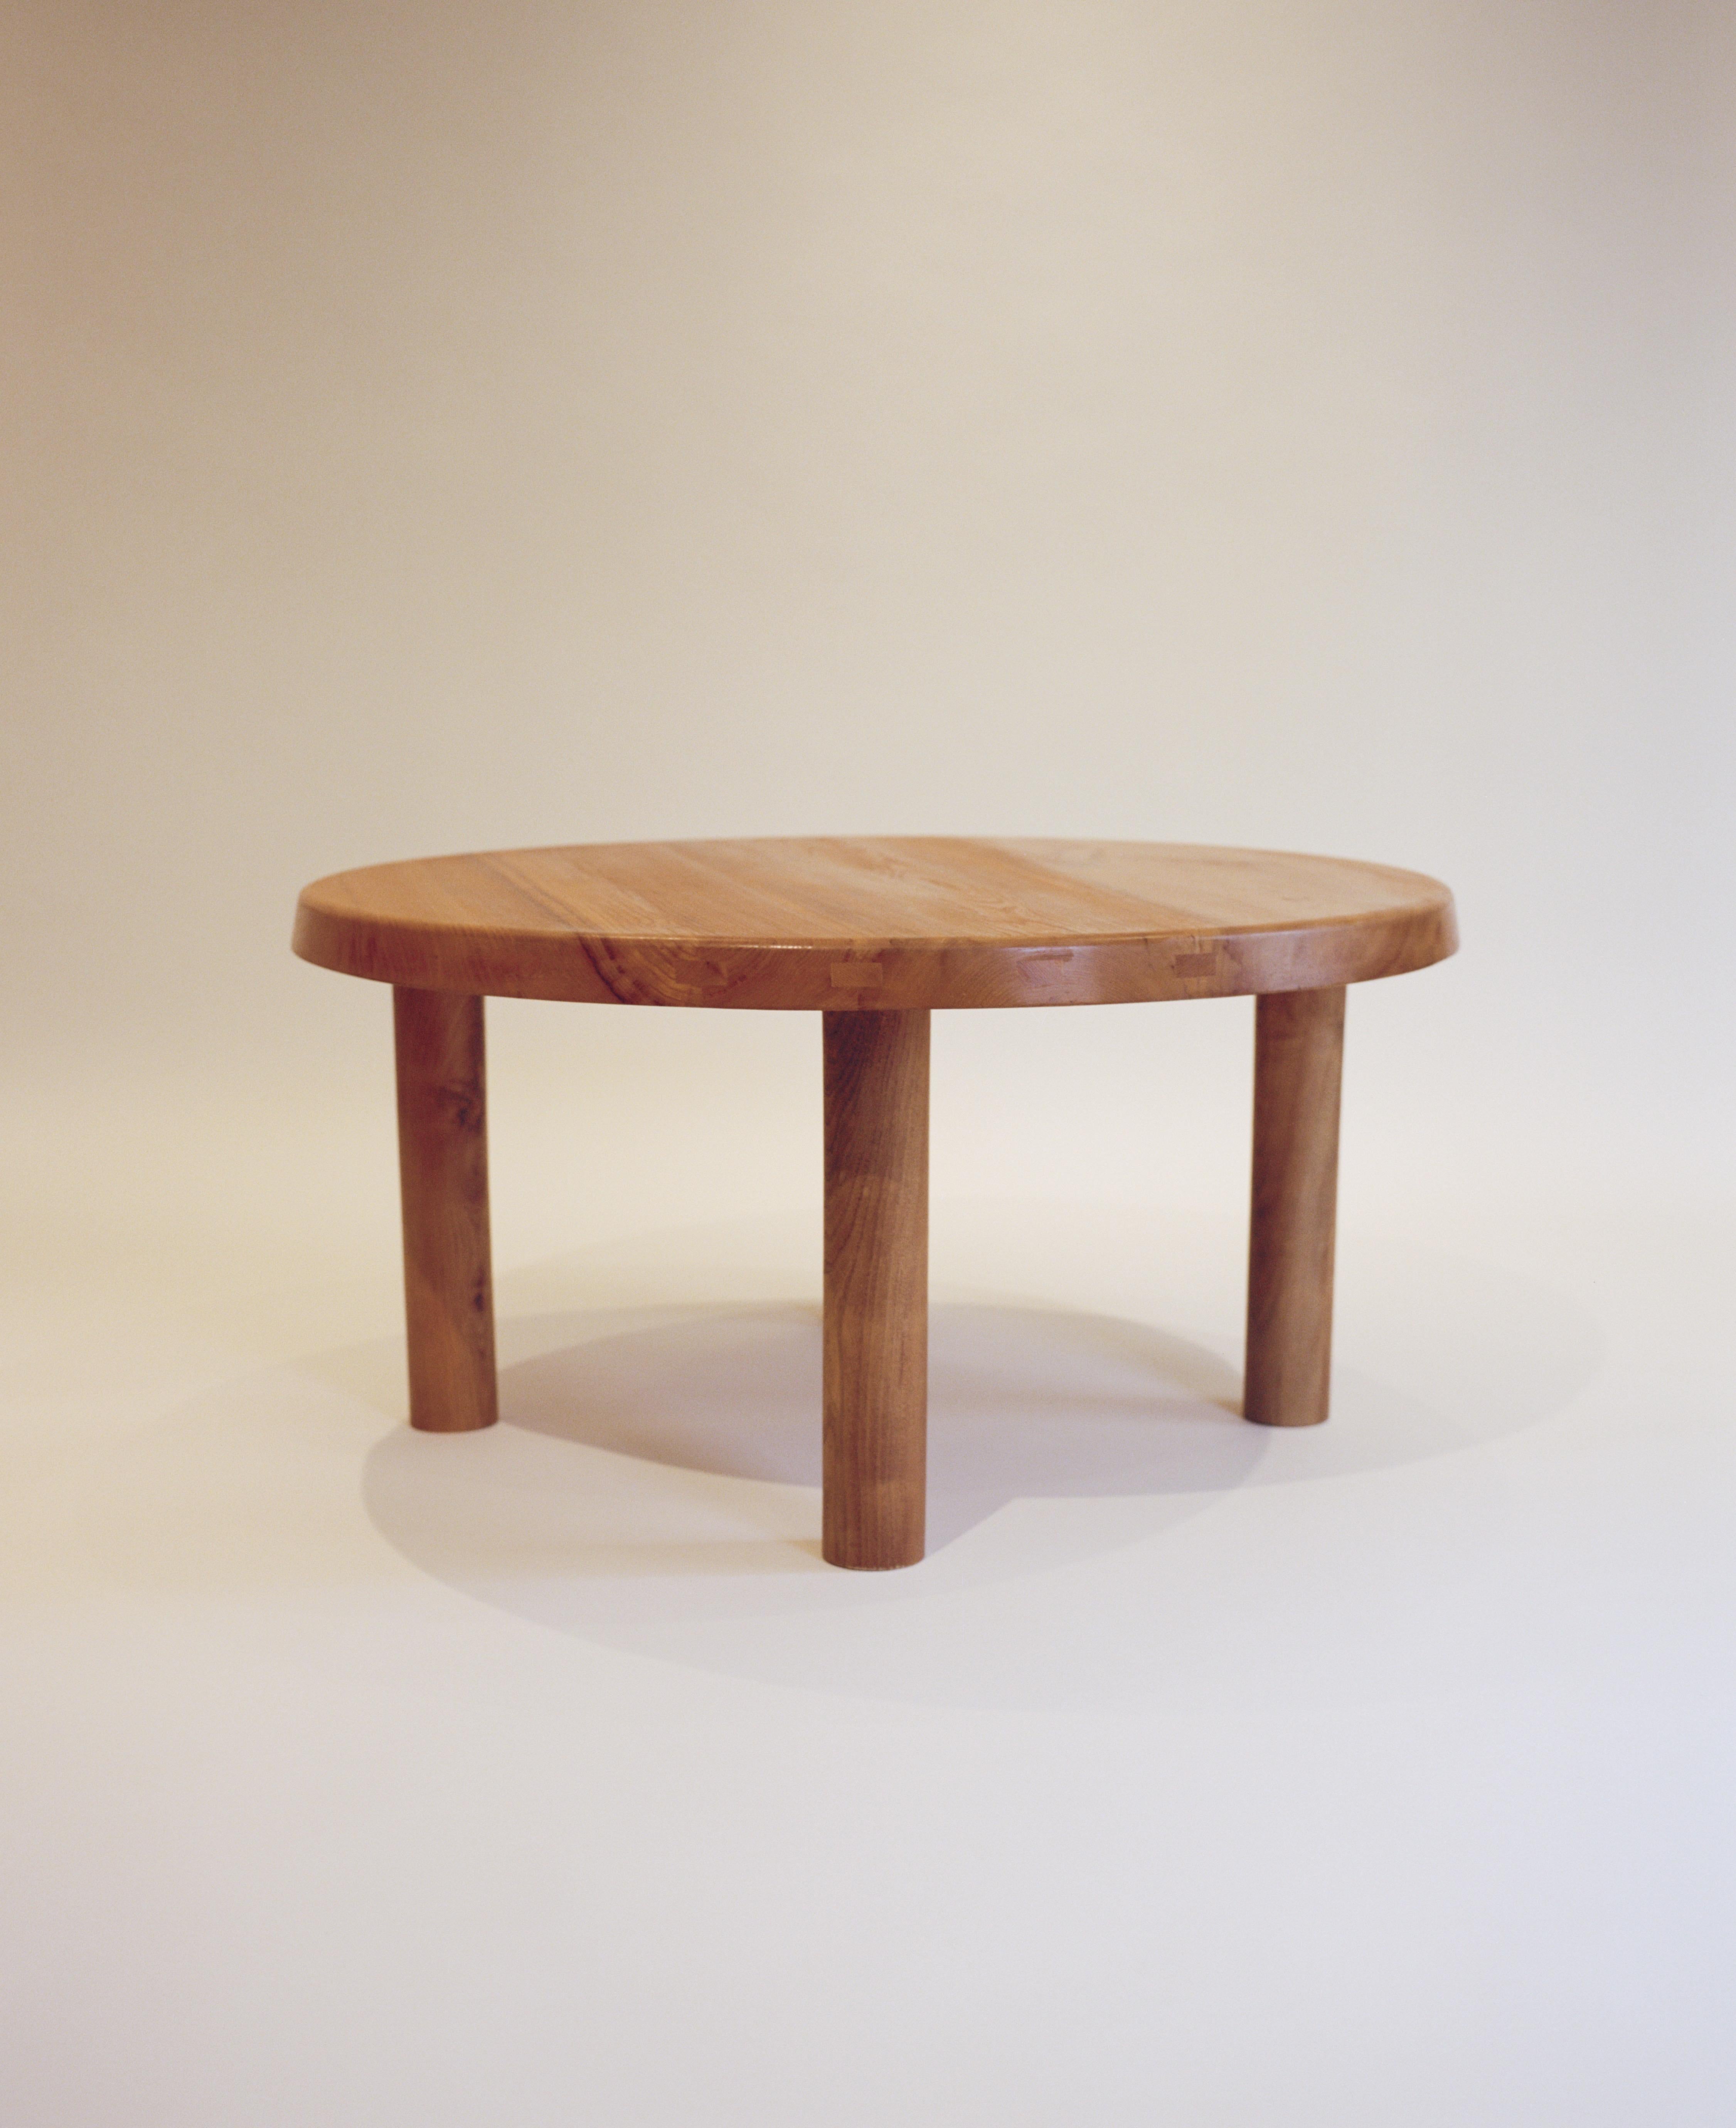 A solid elmwood table by Pierre Chapo designed in the 1960s. Four rounded legs attach to a 2-inch thick top, with beautiful exposed joinery around its edge. An example of Pierre Chapo’s master craftsmanship and consideration of natural materials.